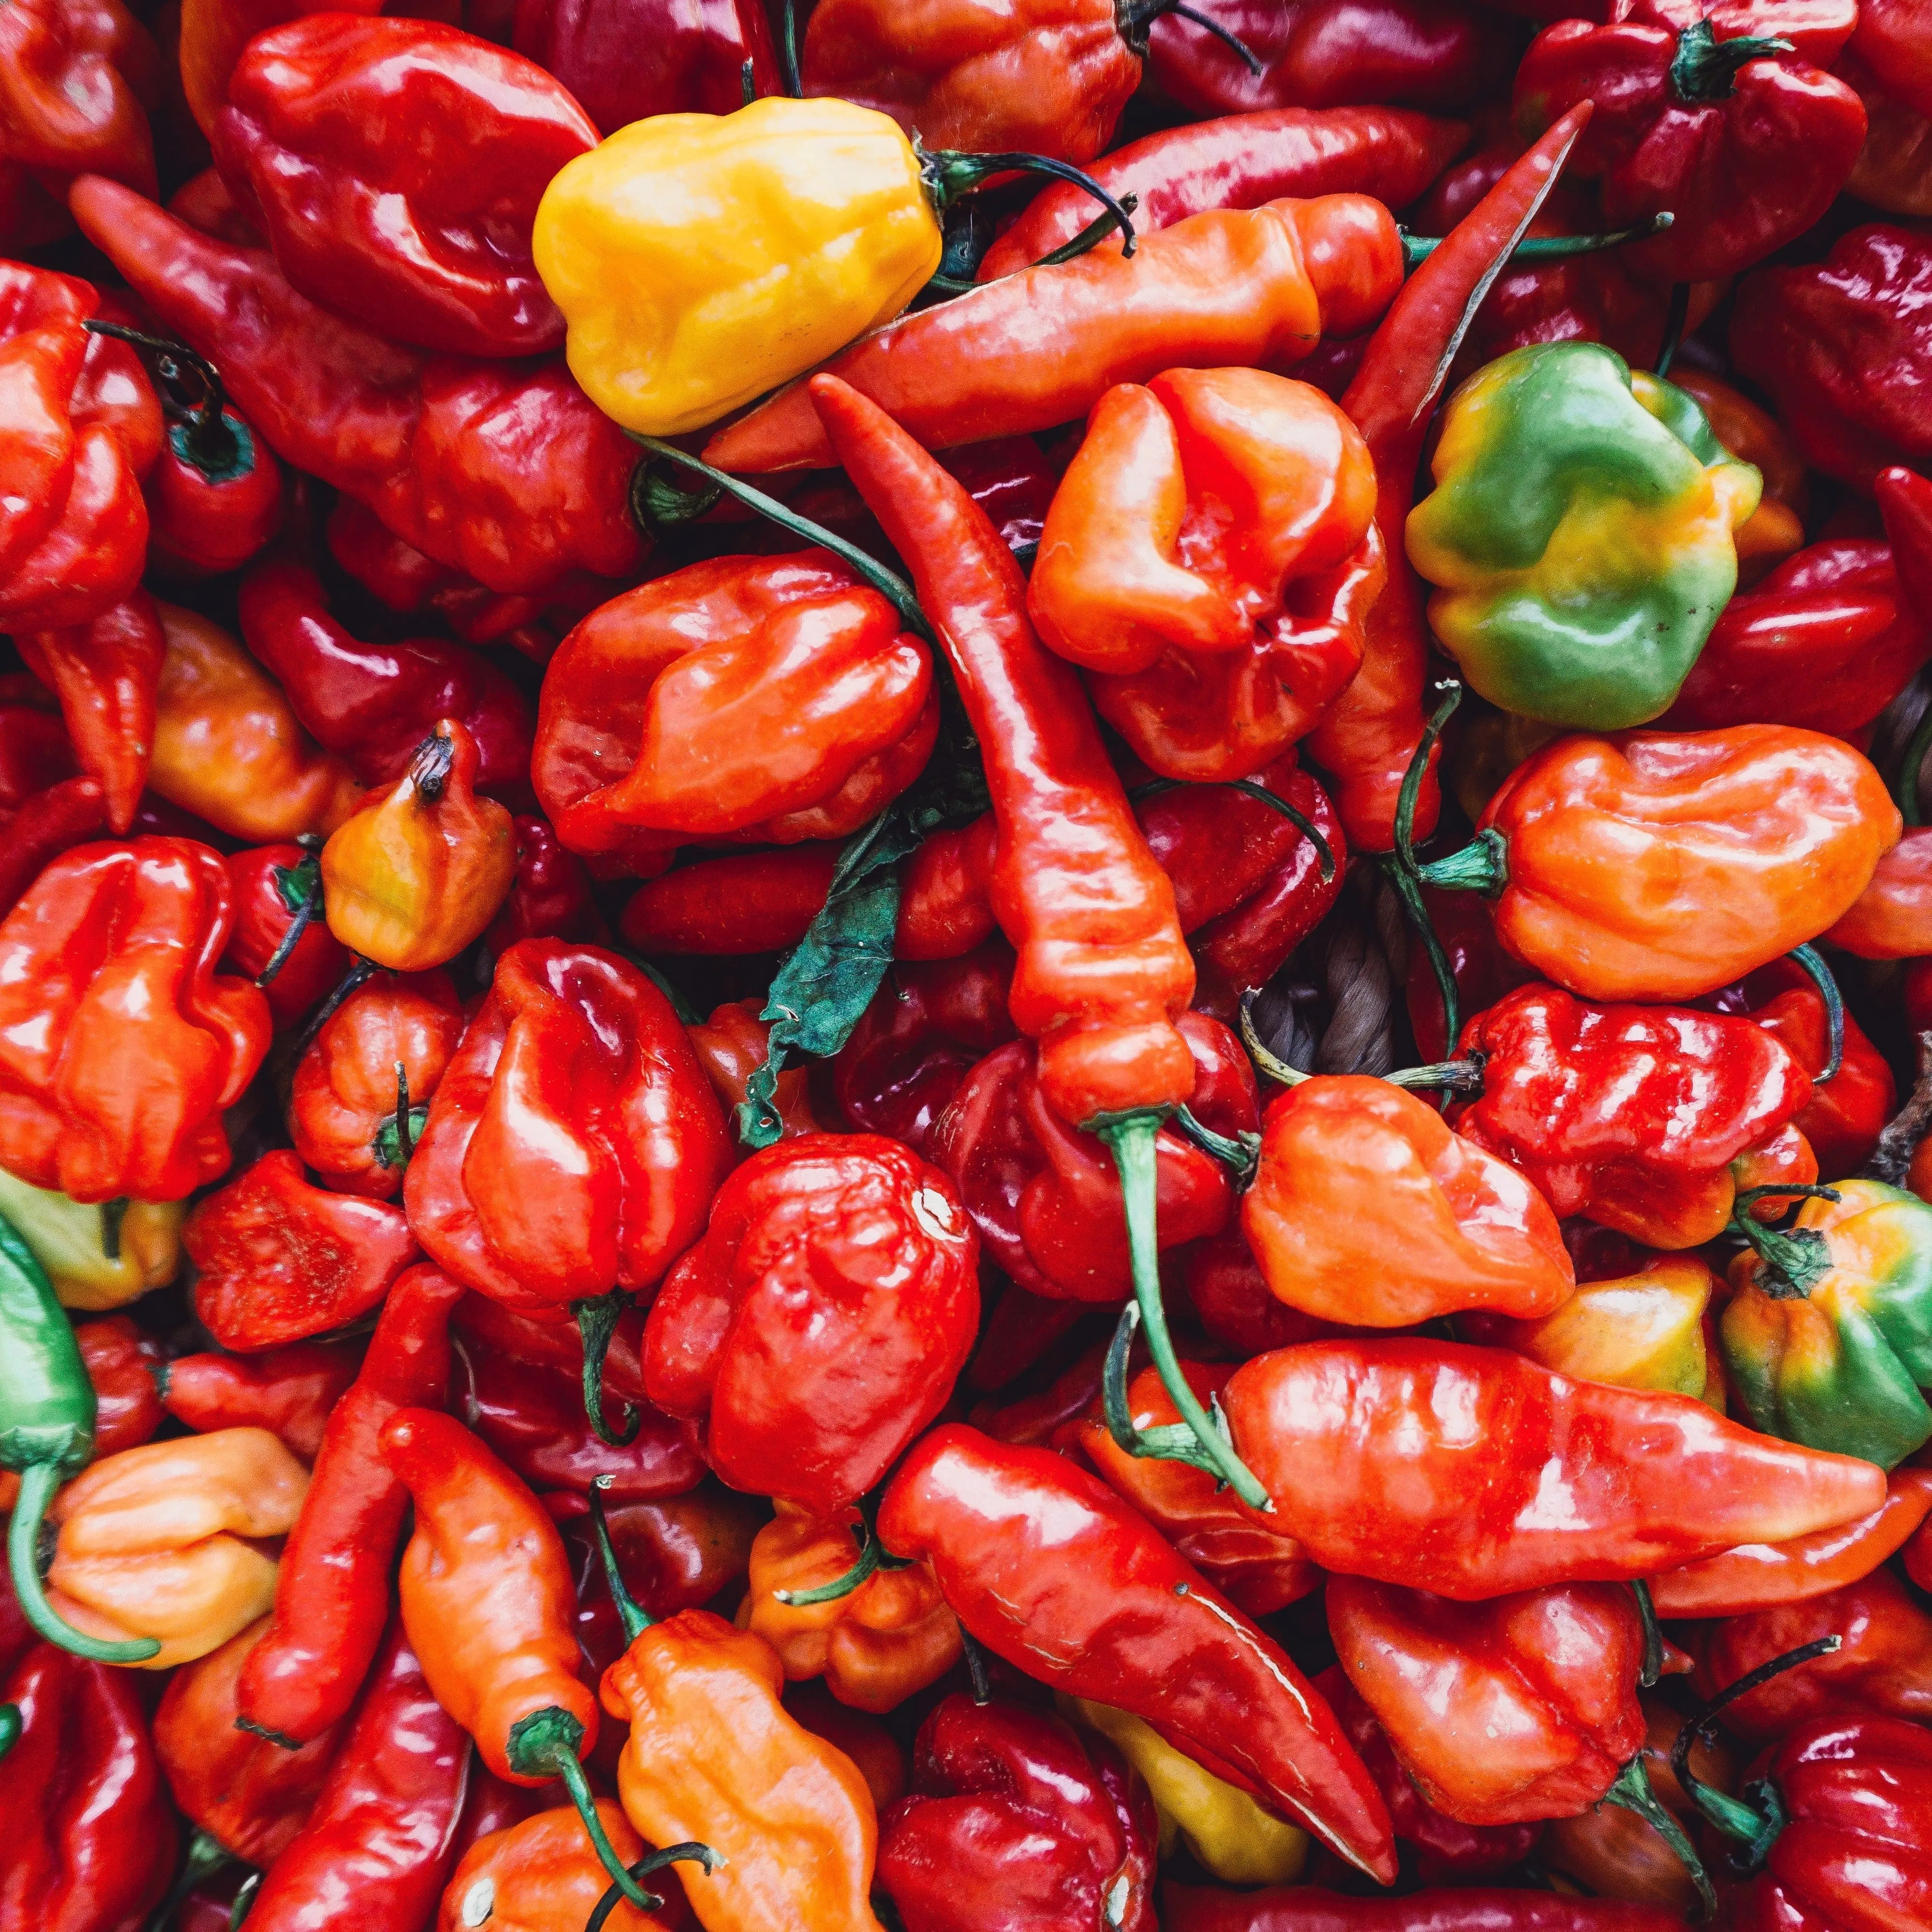 The man behind the Scoville scale